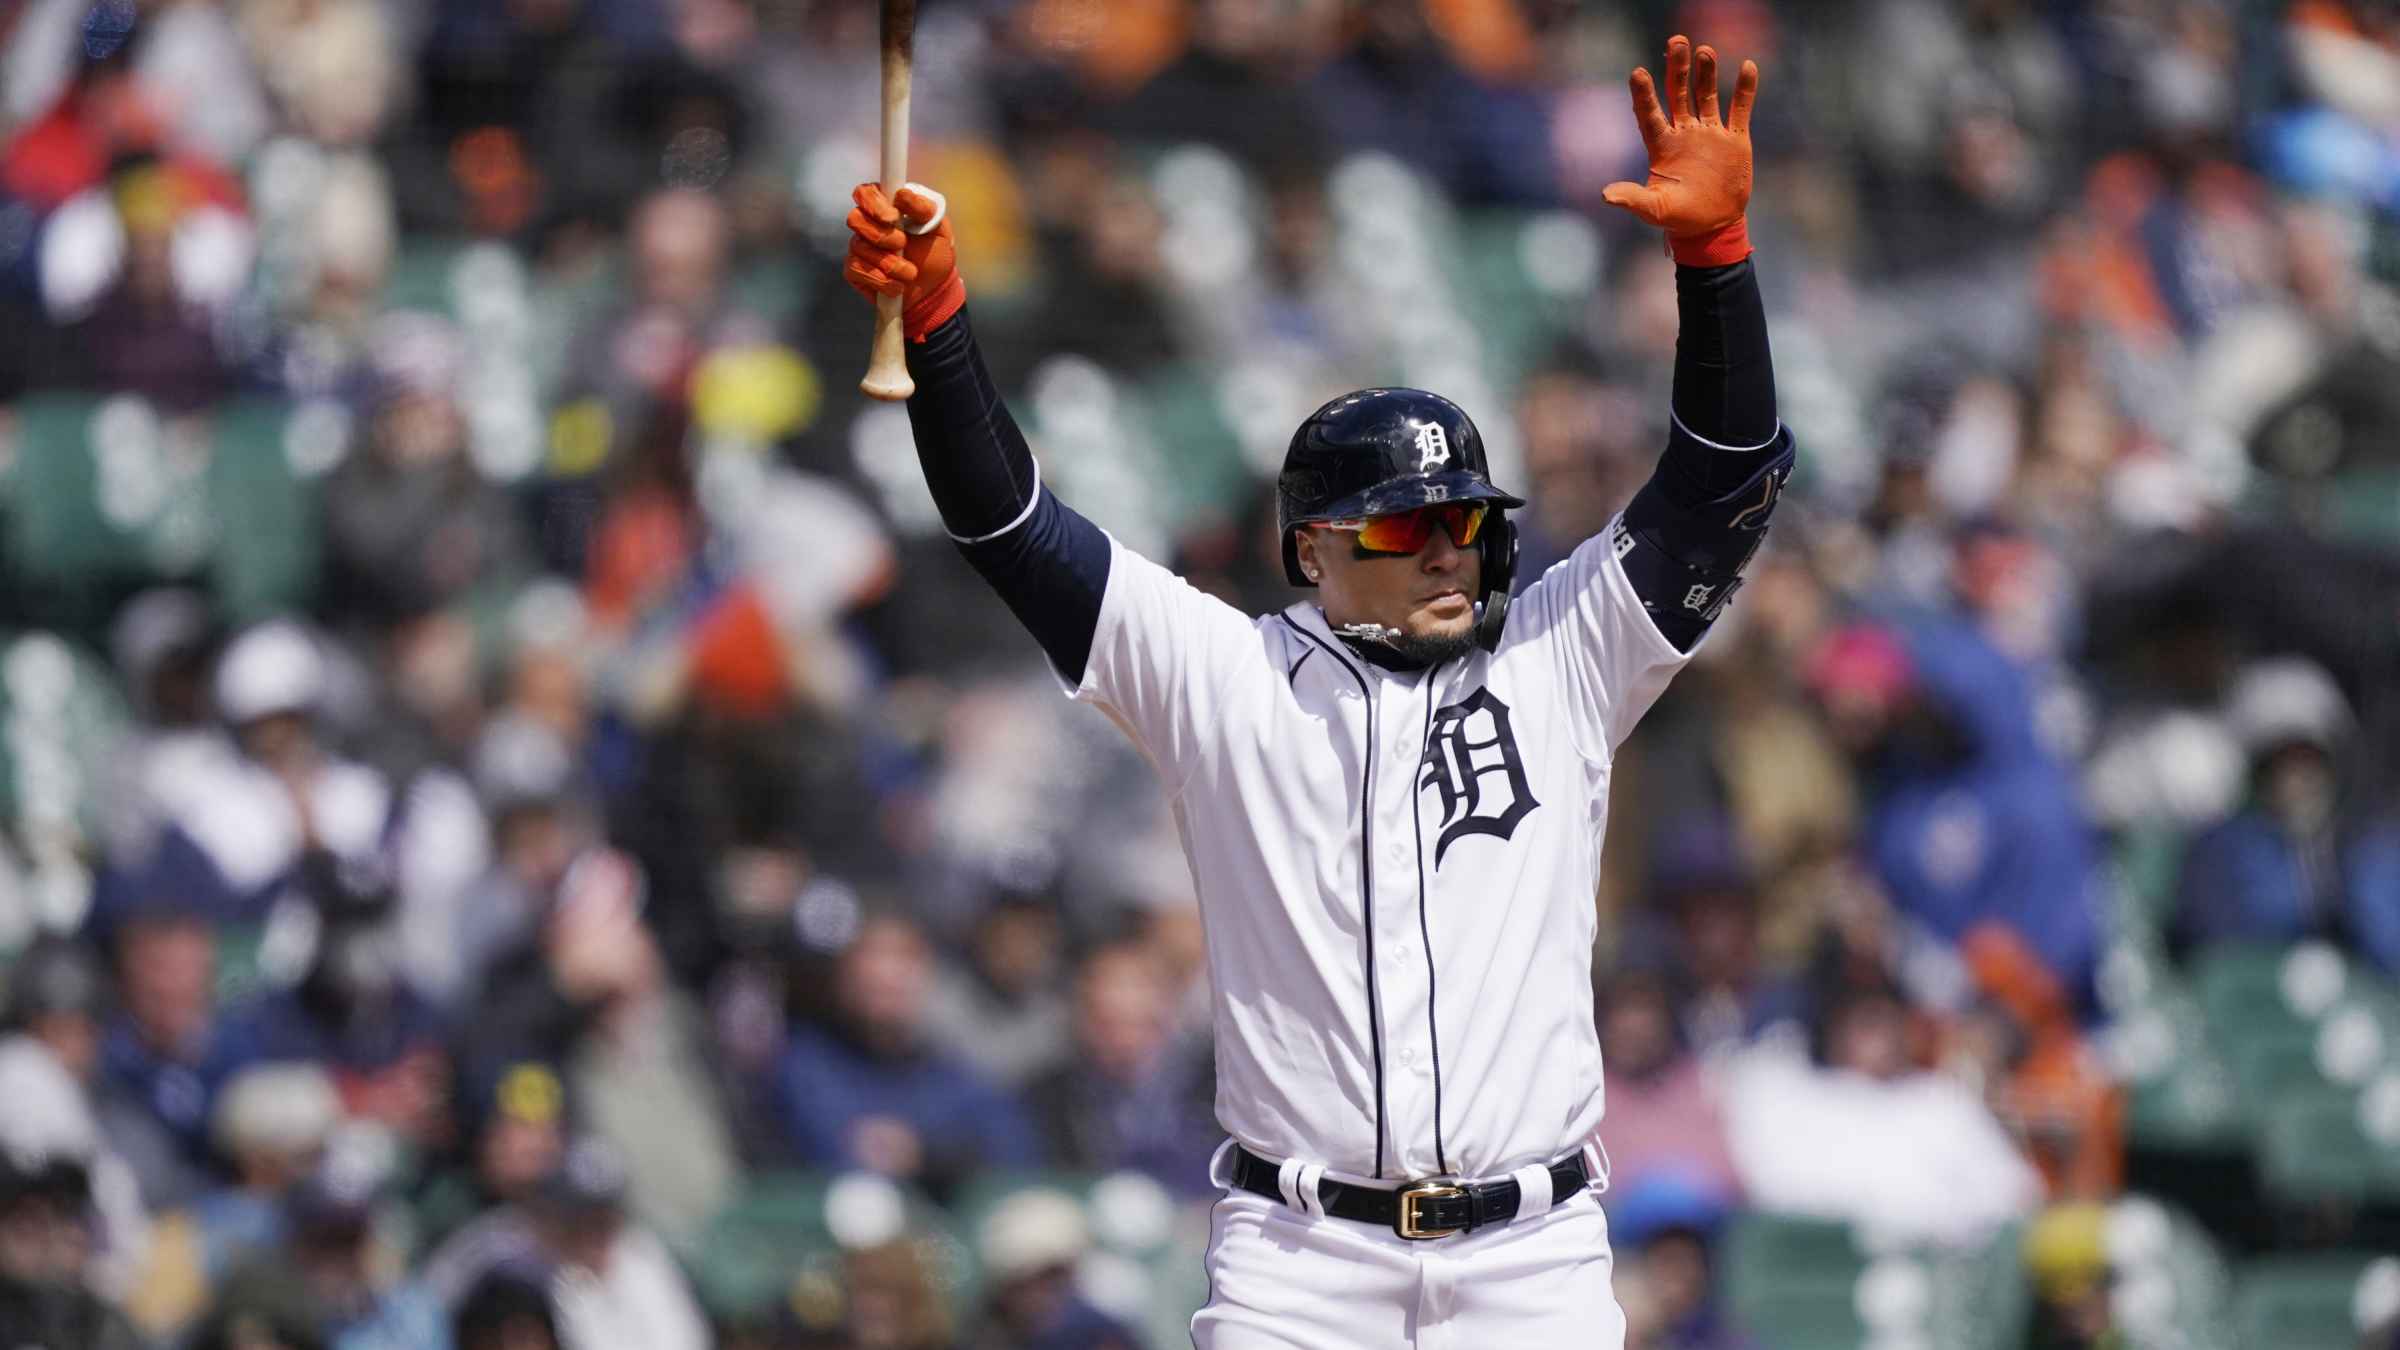 Detroit Tigers earn thrilling walk-off victory over White Sox on Opening Day